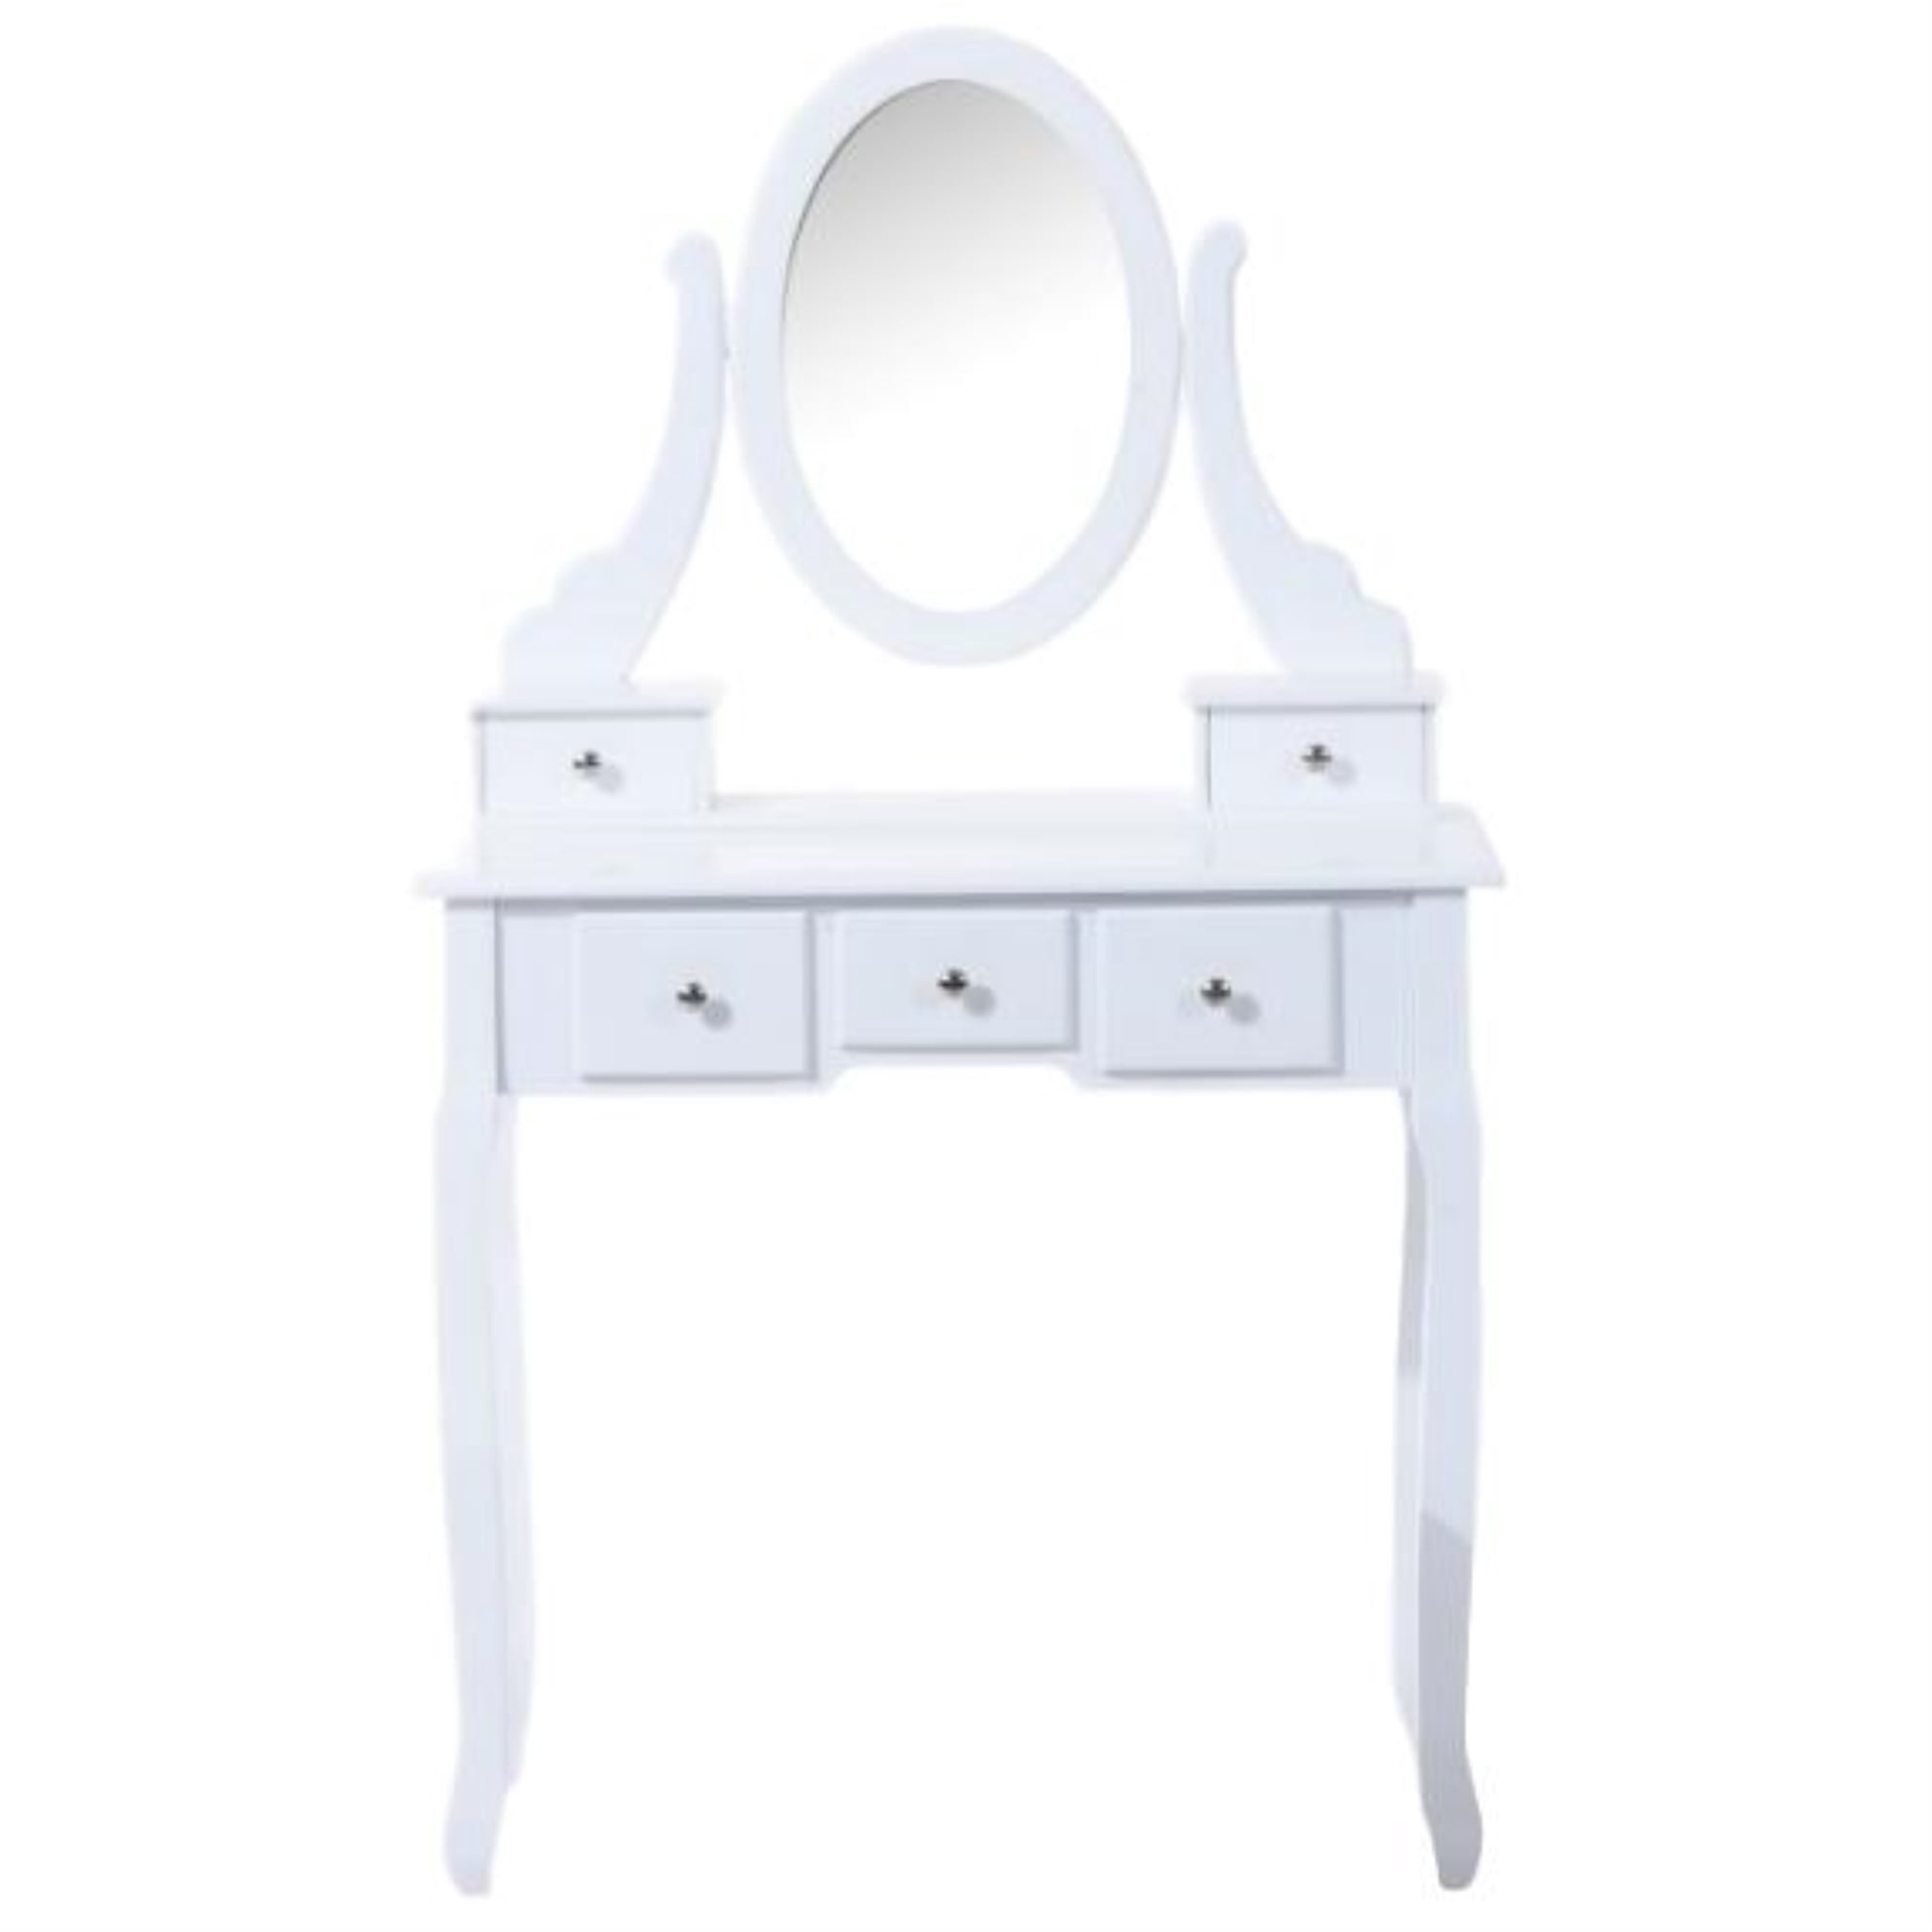 Viscologic Ivory Wooden Mirrored Makeup, Viscologic Pearl Wooden Mirrored Makeup Vanity Table